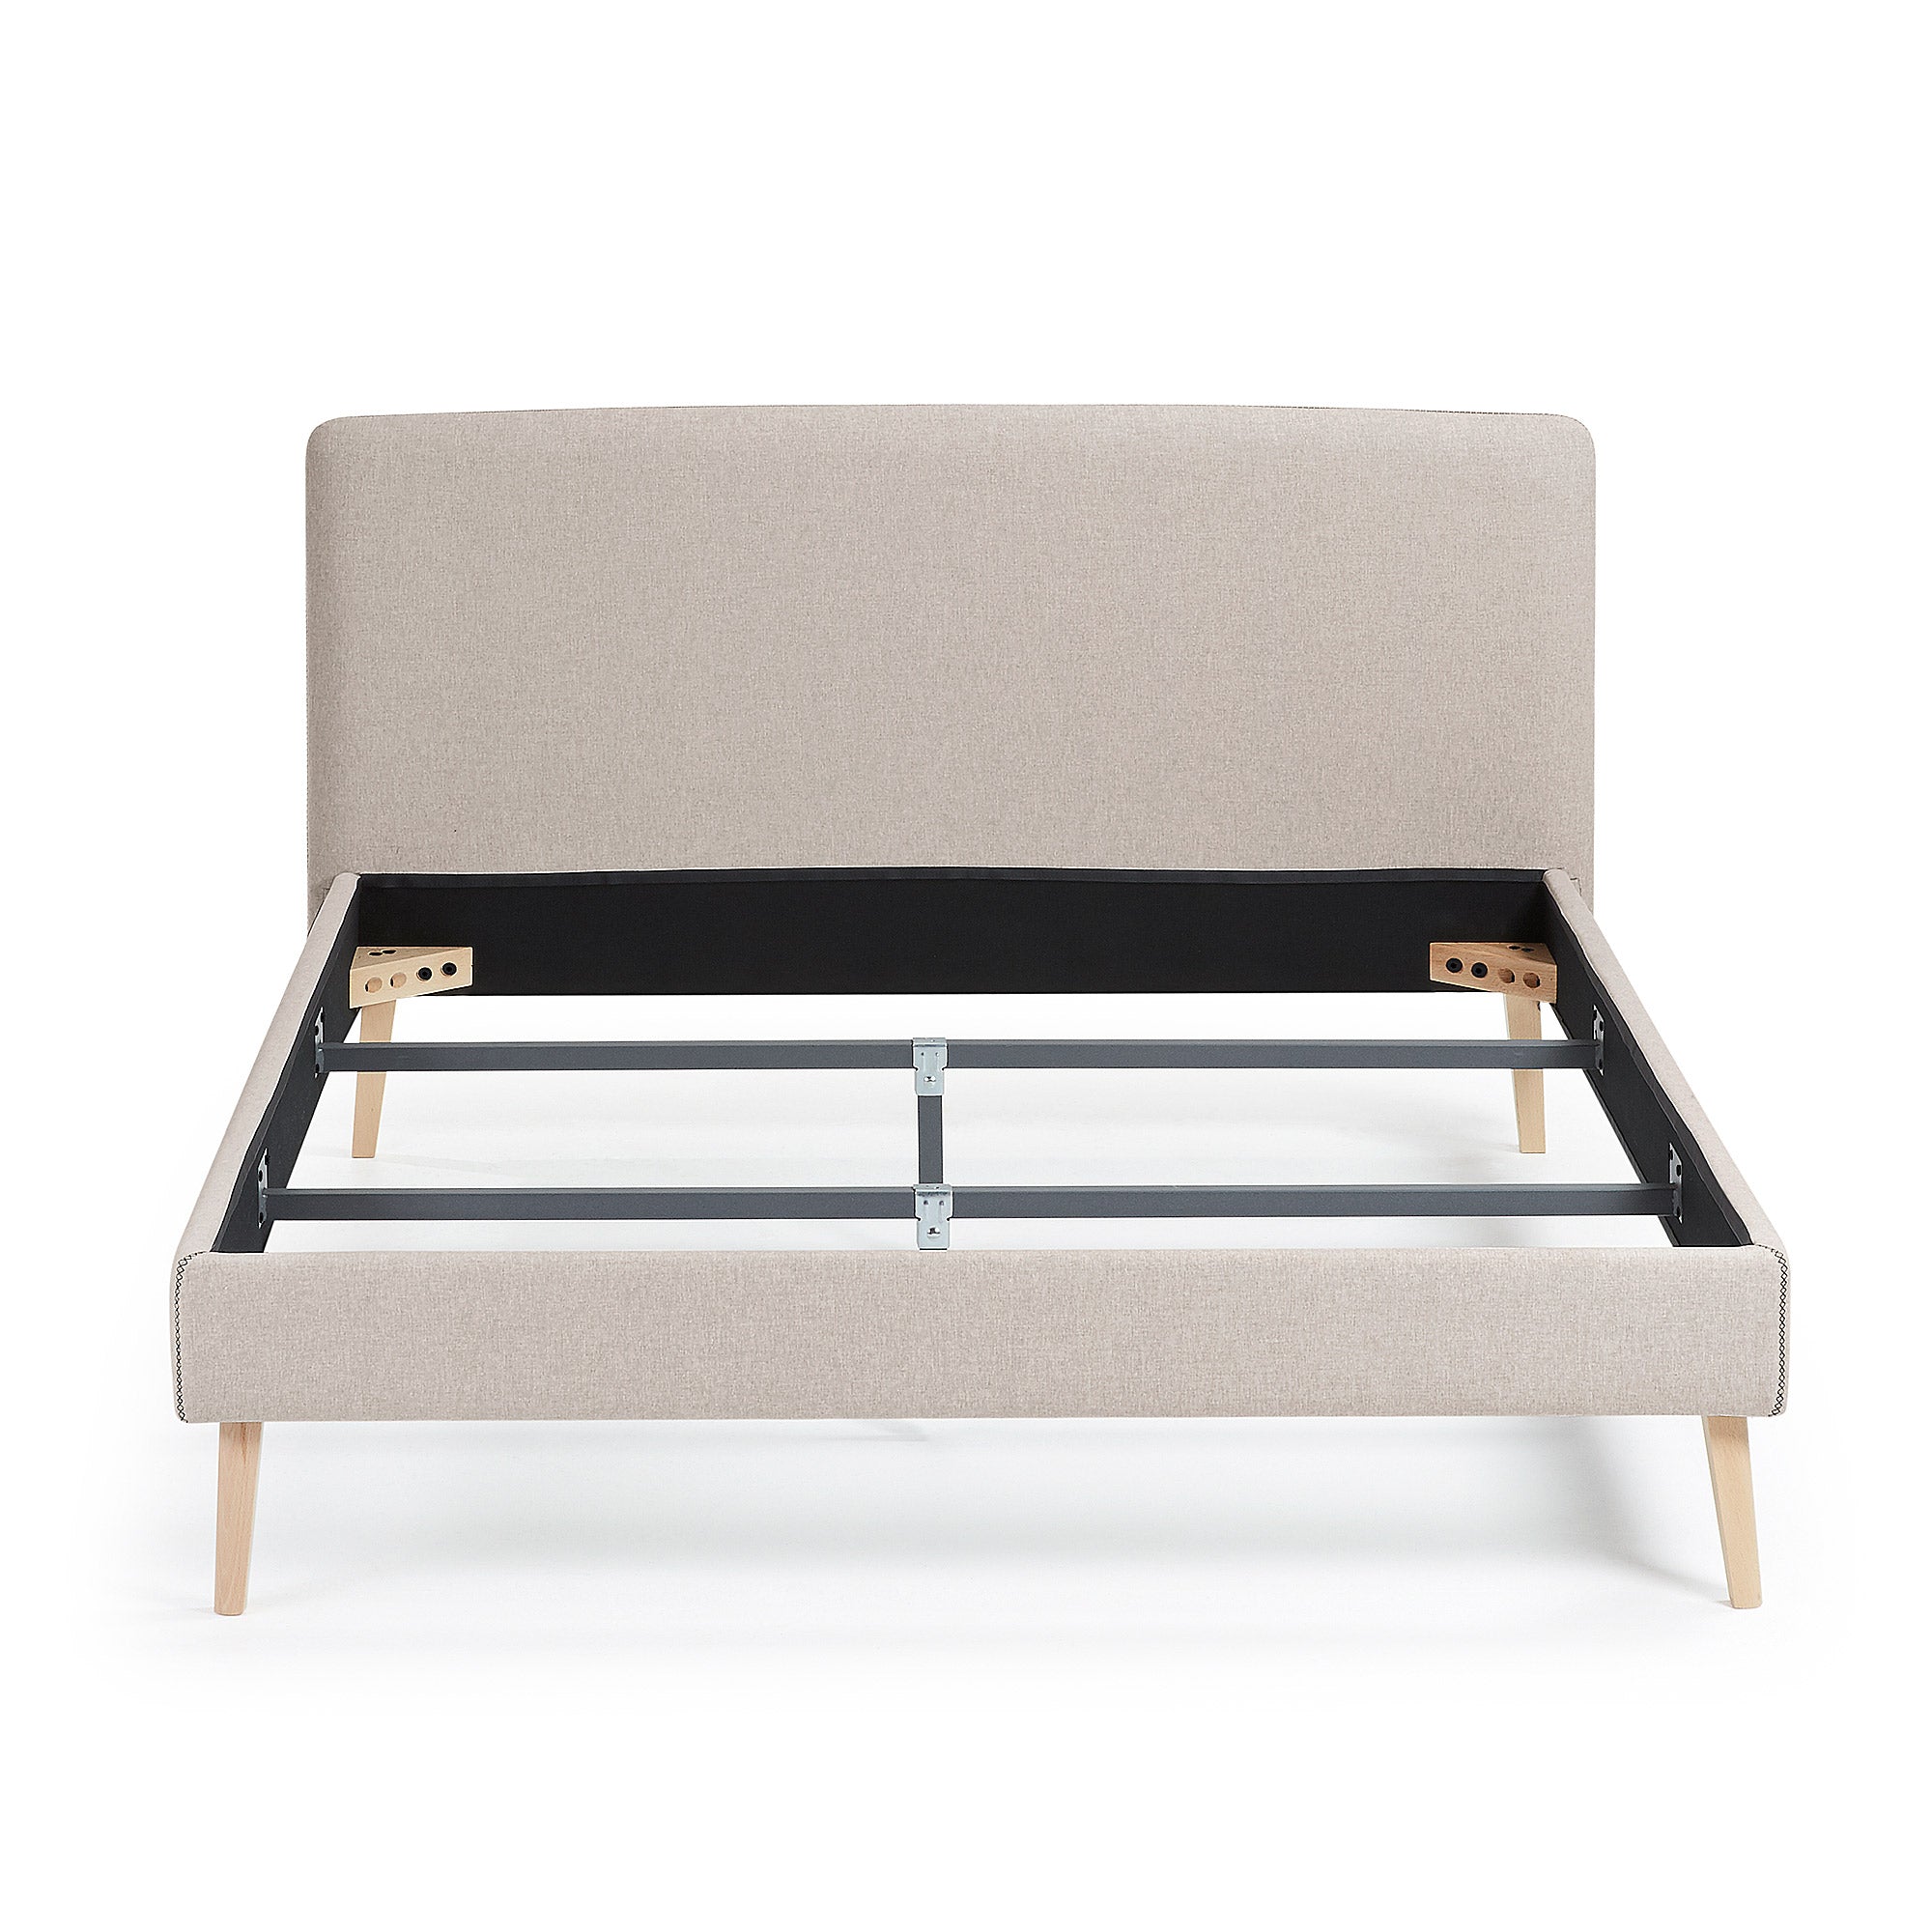 Dyla bed with removable cover in beige, with solid beech wood legs for a 160 x 200 cm mattress